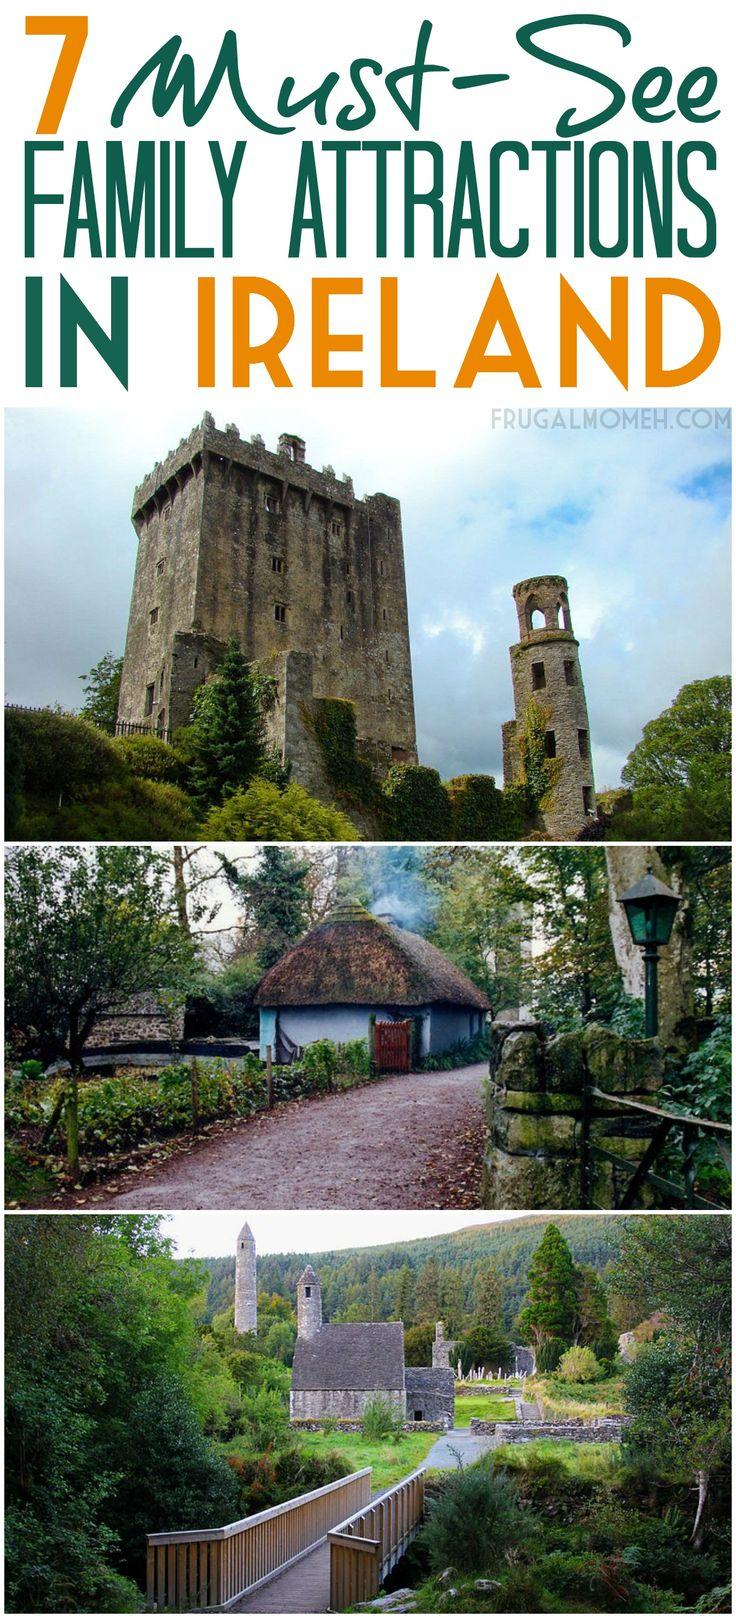 Mariage - 7 Must-See Family Attractions In Ireland - Frugal Mom Eh!